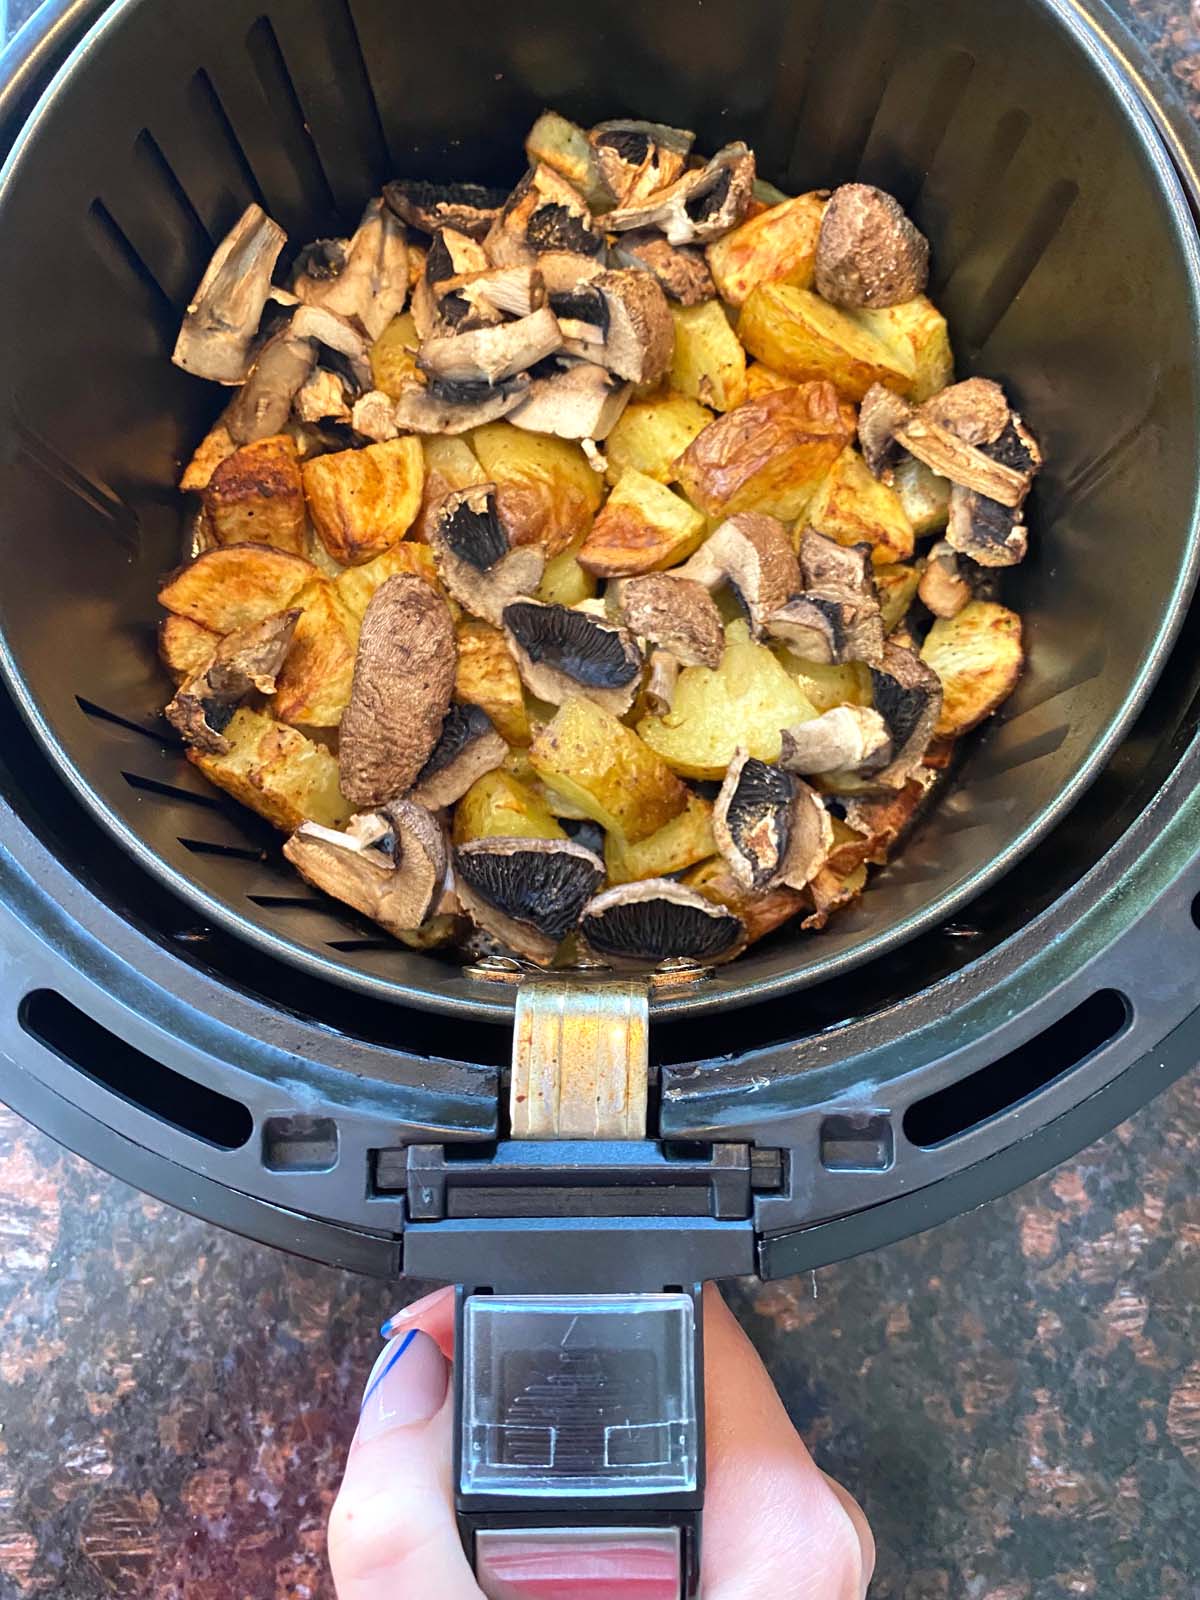 Cooked potatoes and mushrooms in an air fryer.